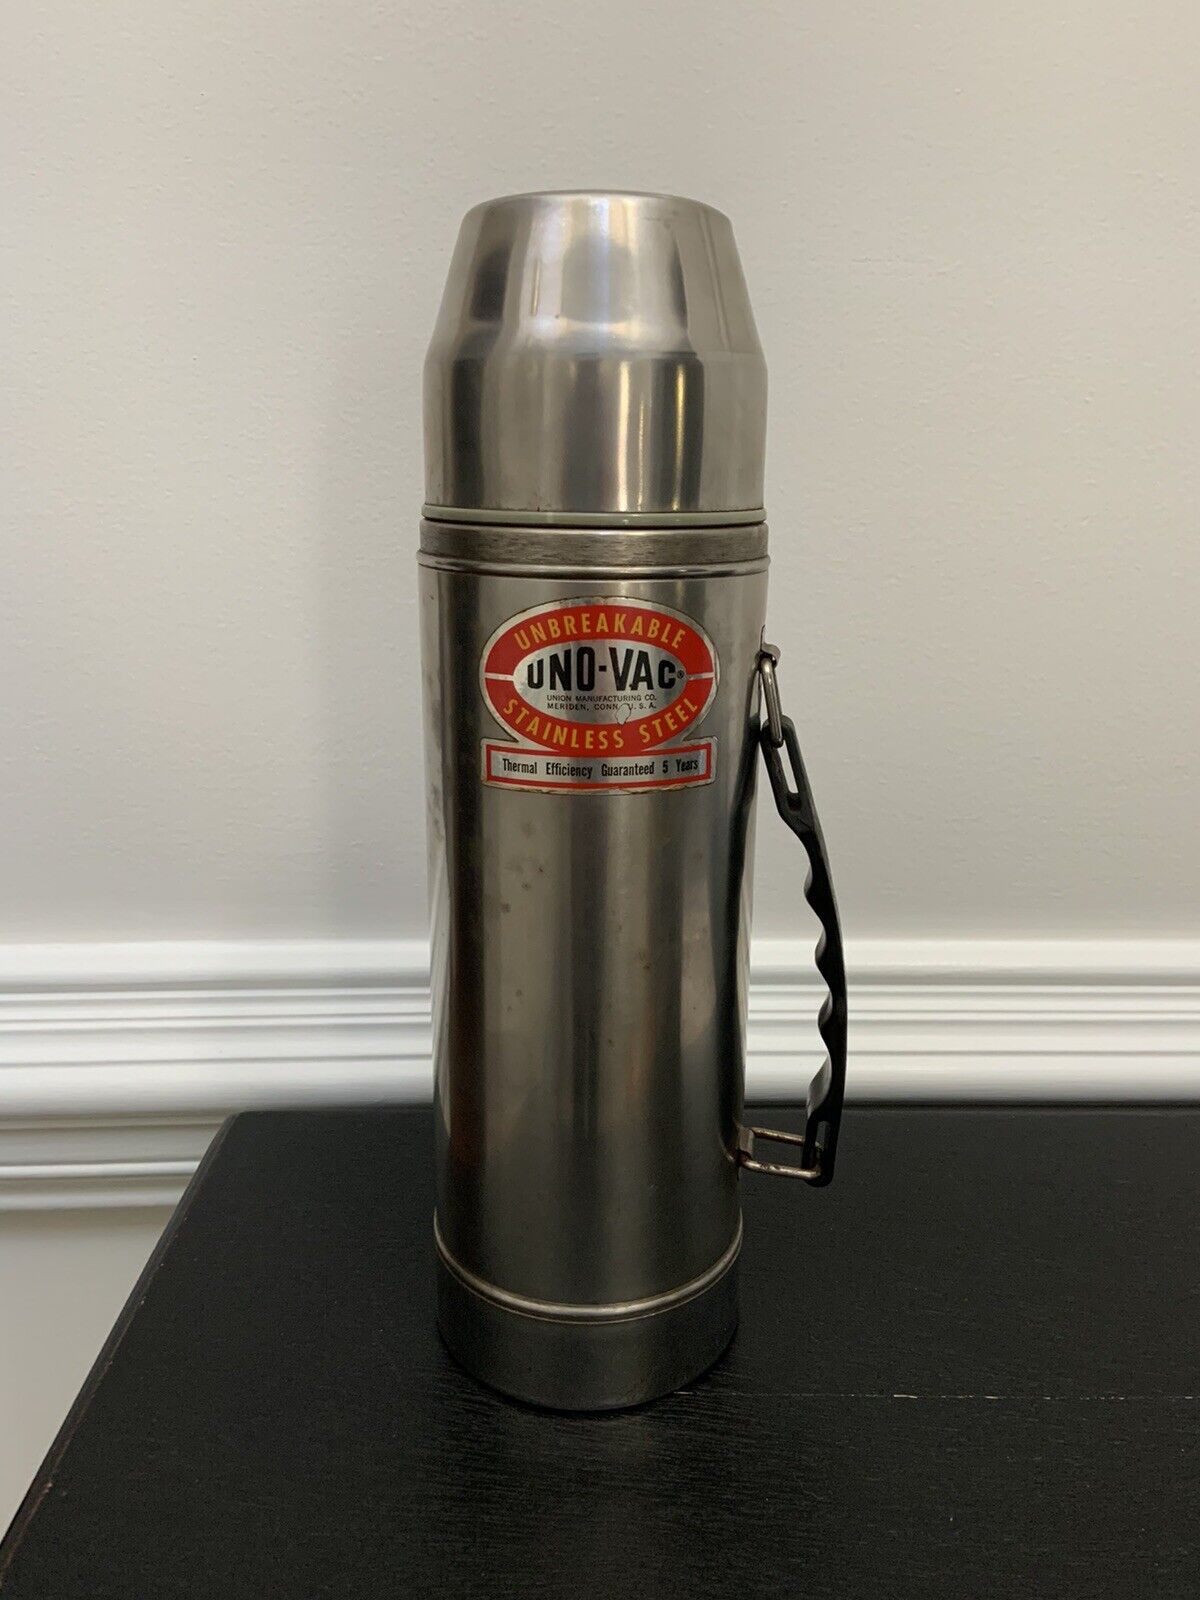 Union MFG. Unbreakable Stainless Steel Jumbo Uno-Vac Hot / Cold Lunchbox Thermos